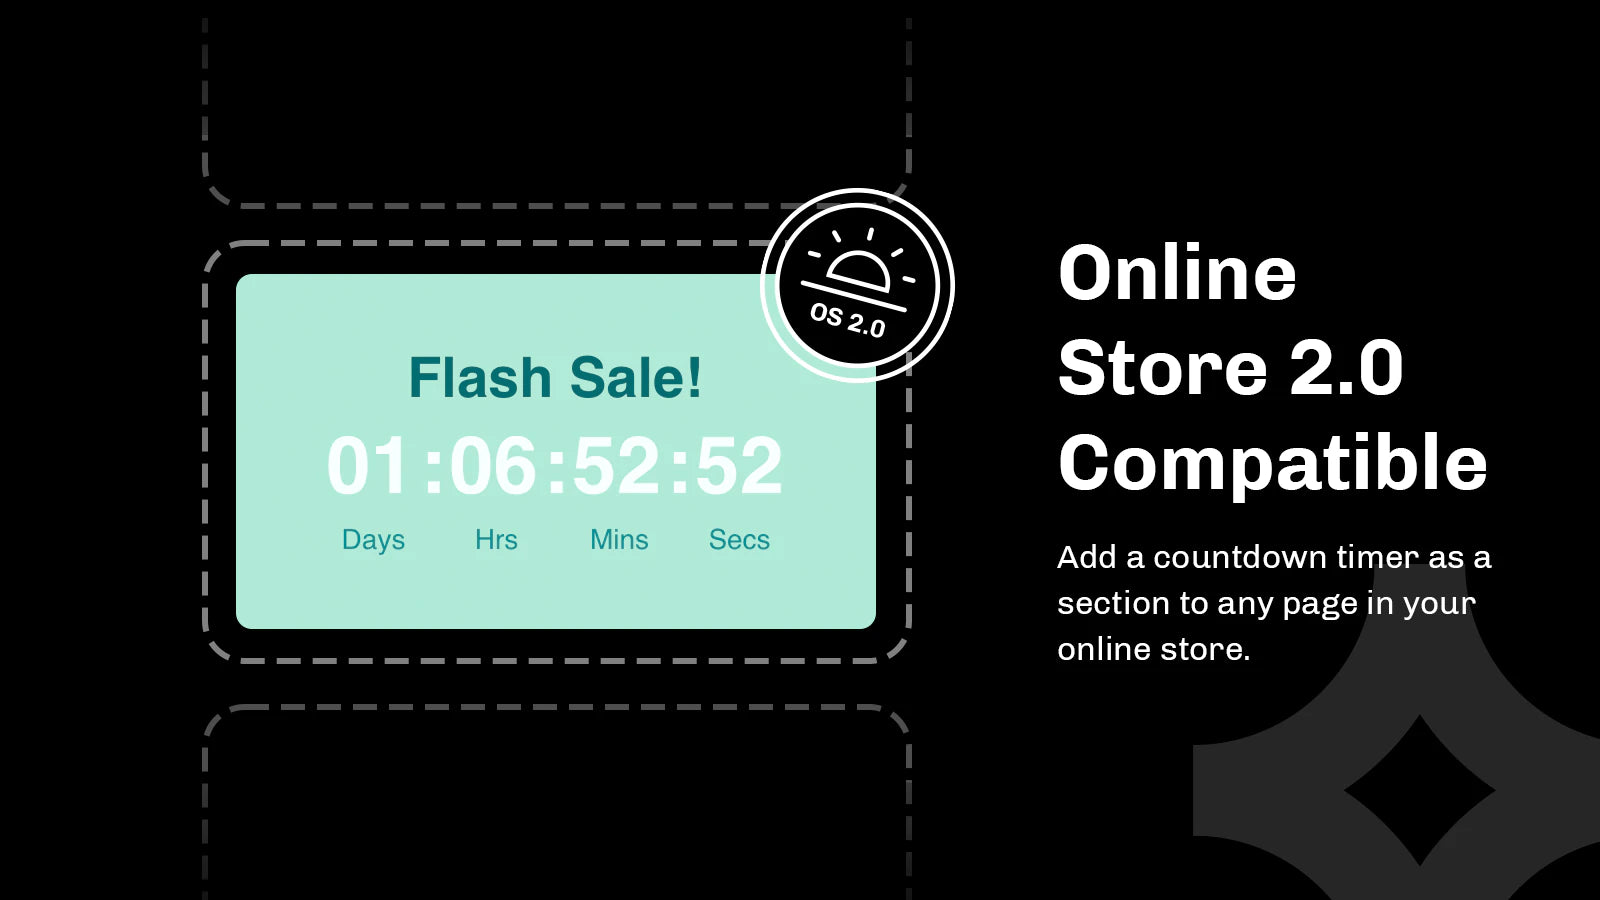 Essential Countdown Timer Bar compatible with online store 2.0